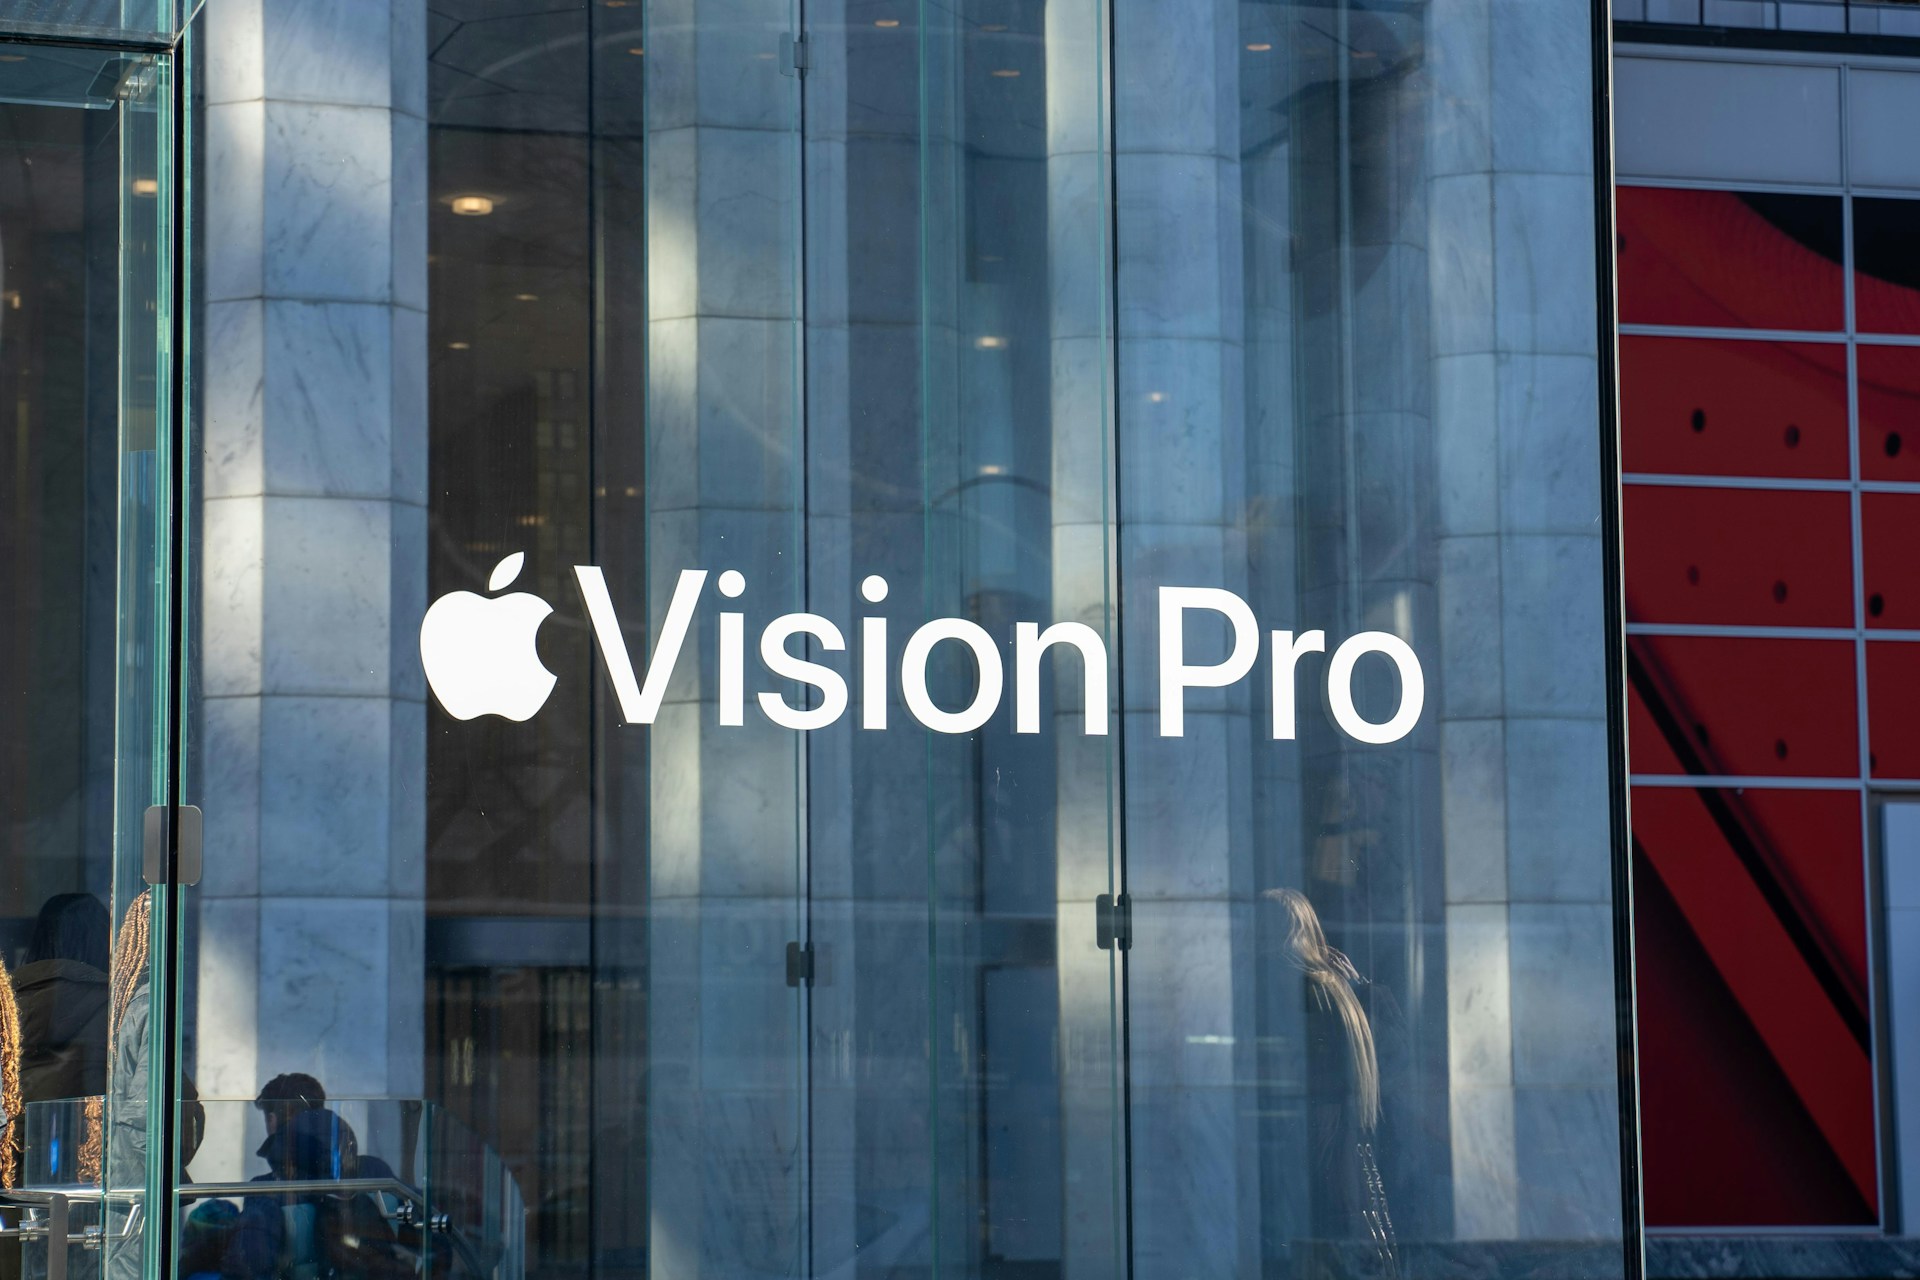 The Economics Behind Apple’s Vision Pro Pricing